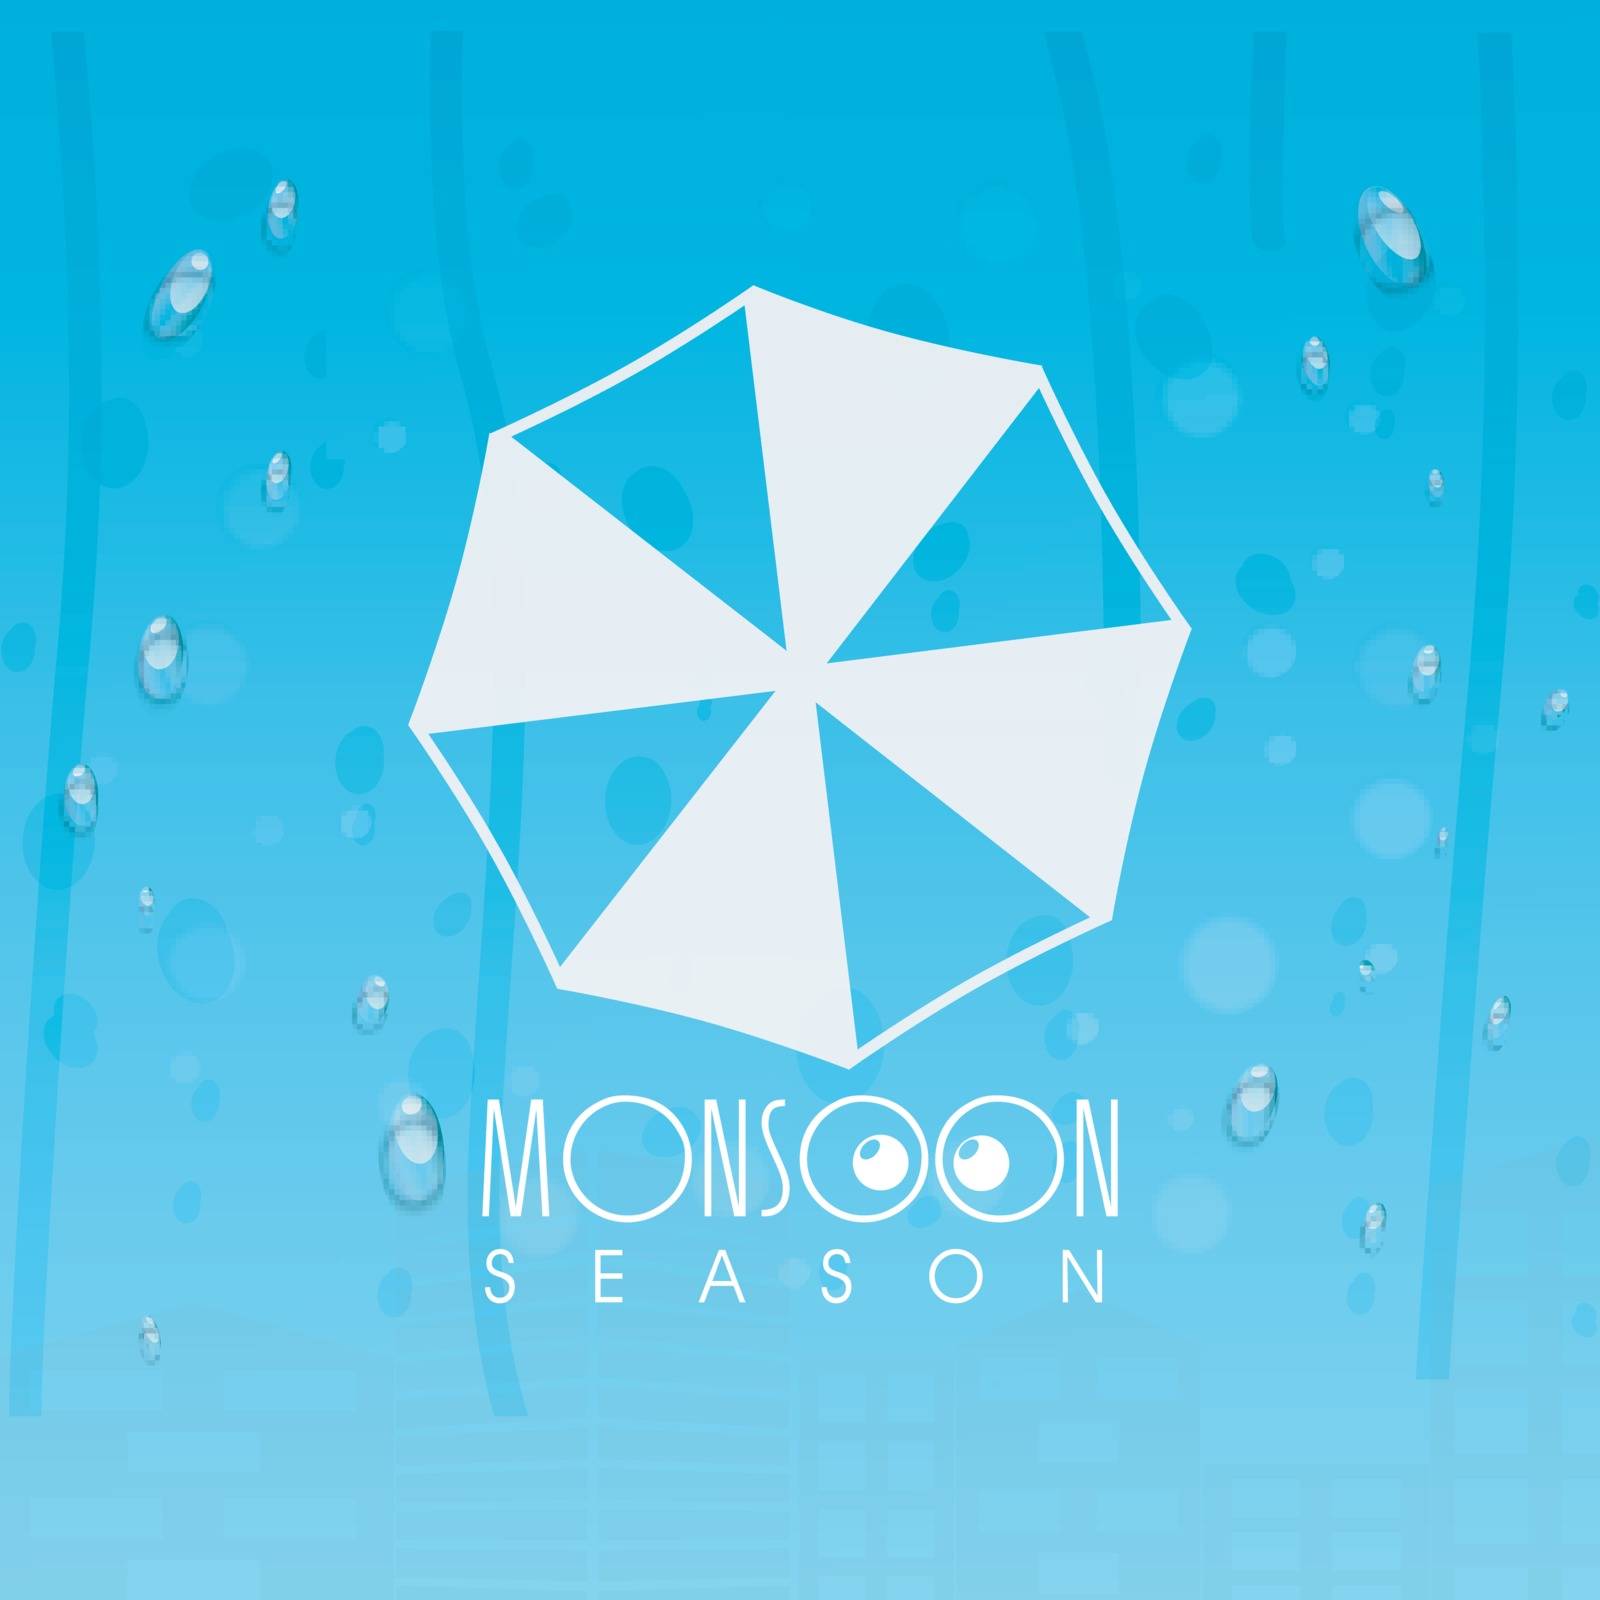 Monsoon Season background with umbrella. by aispl